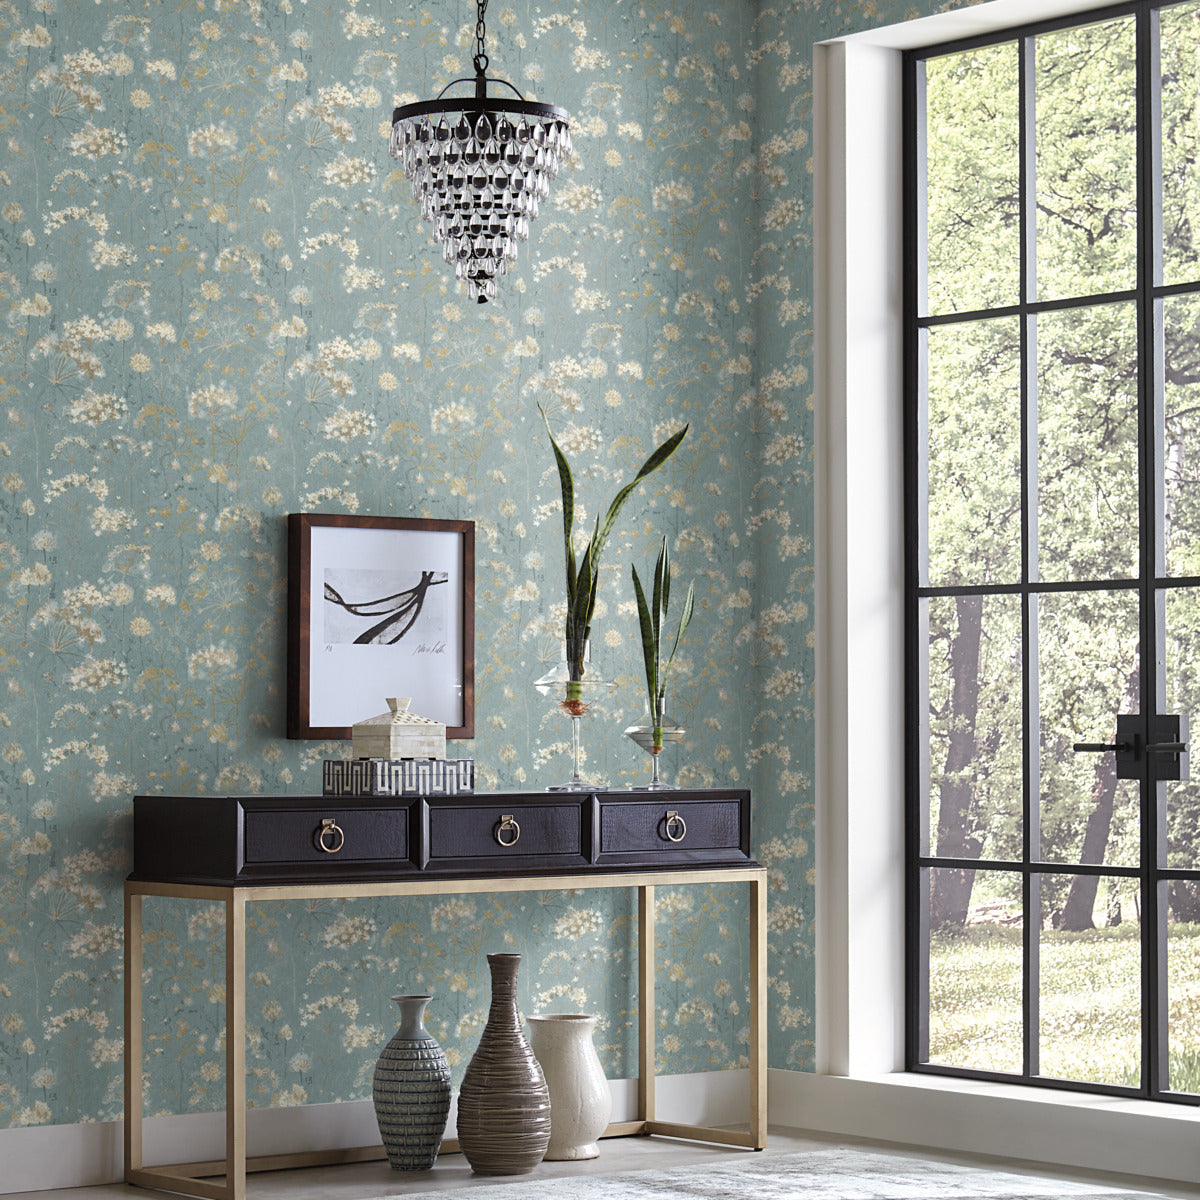 Peaceful Plumes Wallpapers from Candice Olson Botanical Dreams Collection   The Savvy Decorator